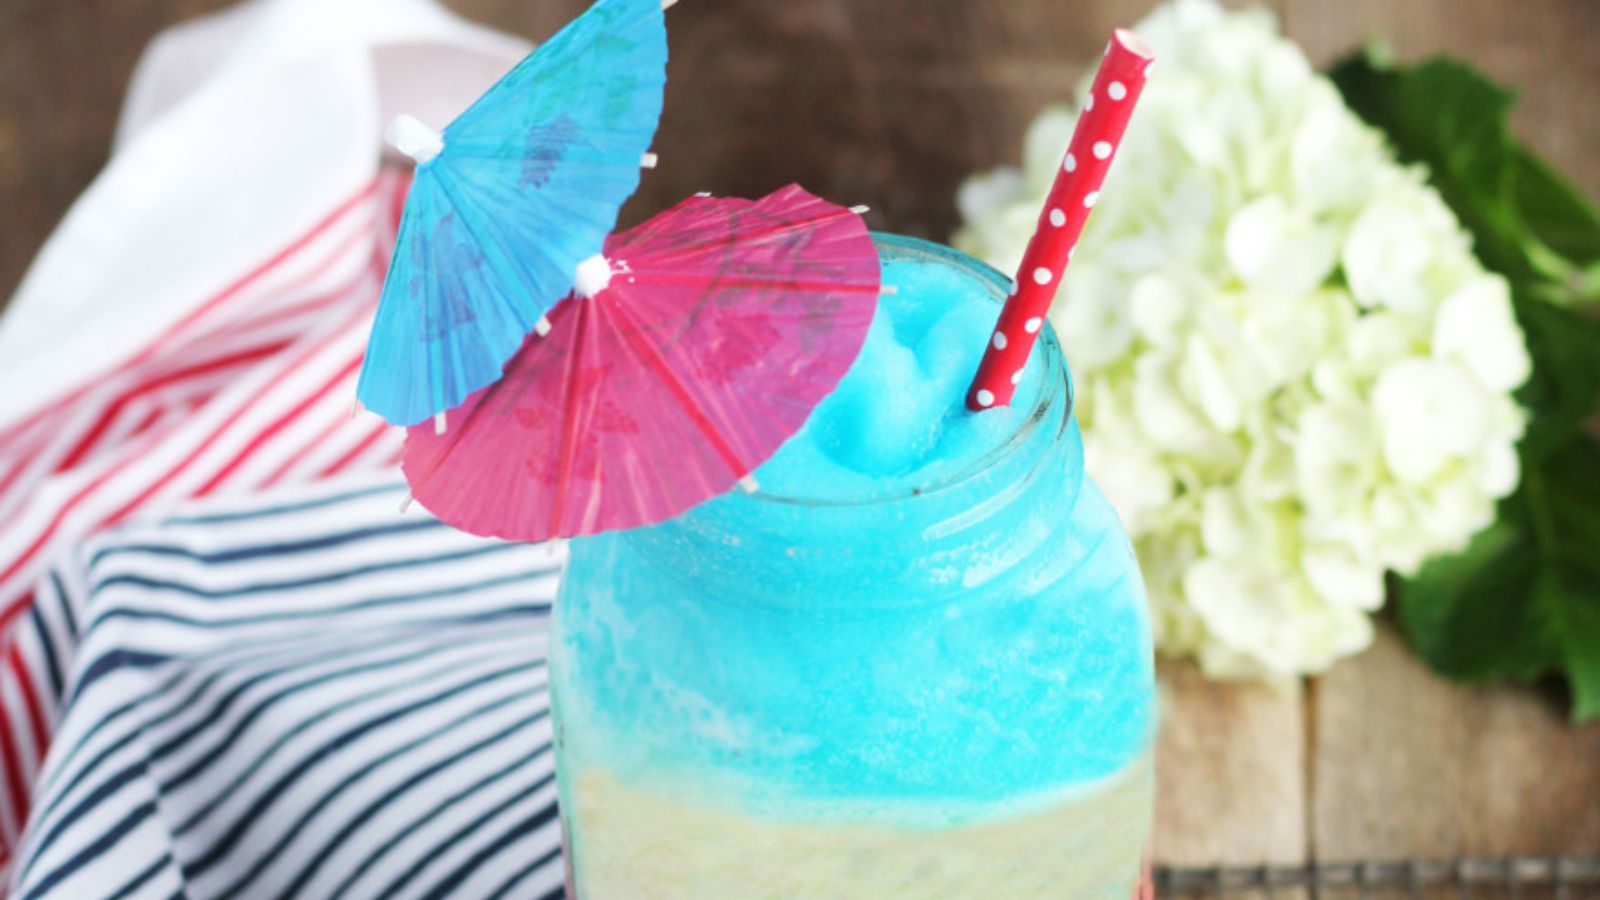 RED WHITE AND BLUE PINA COLADA